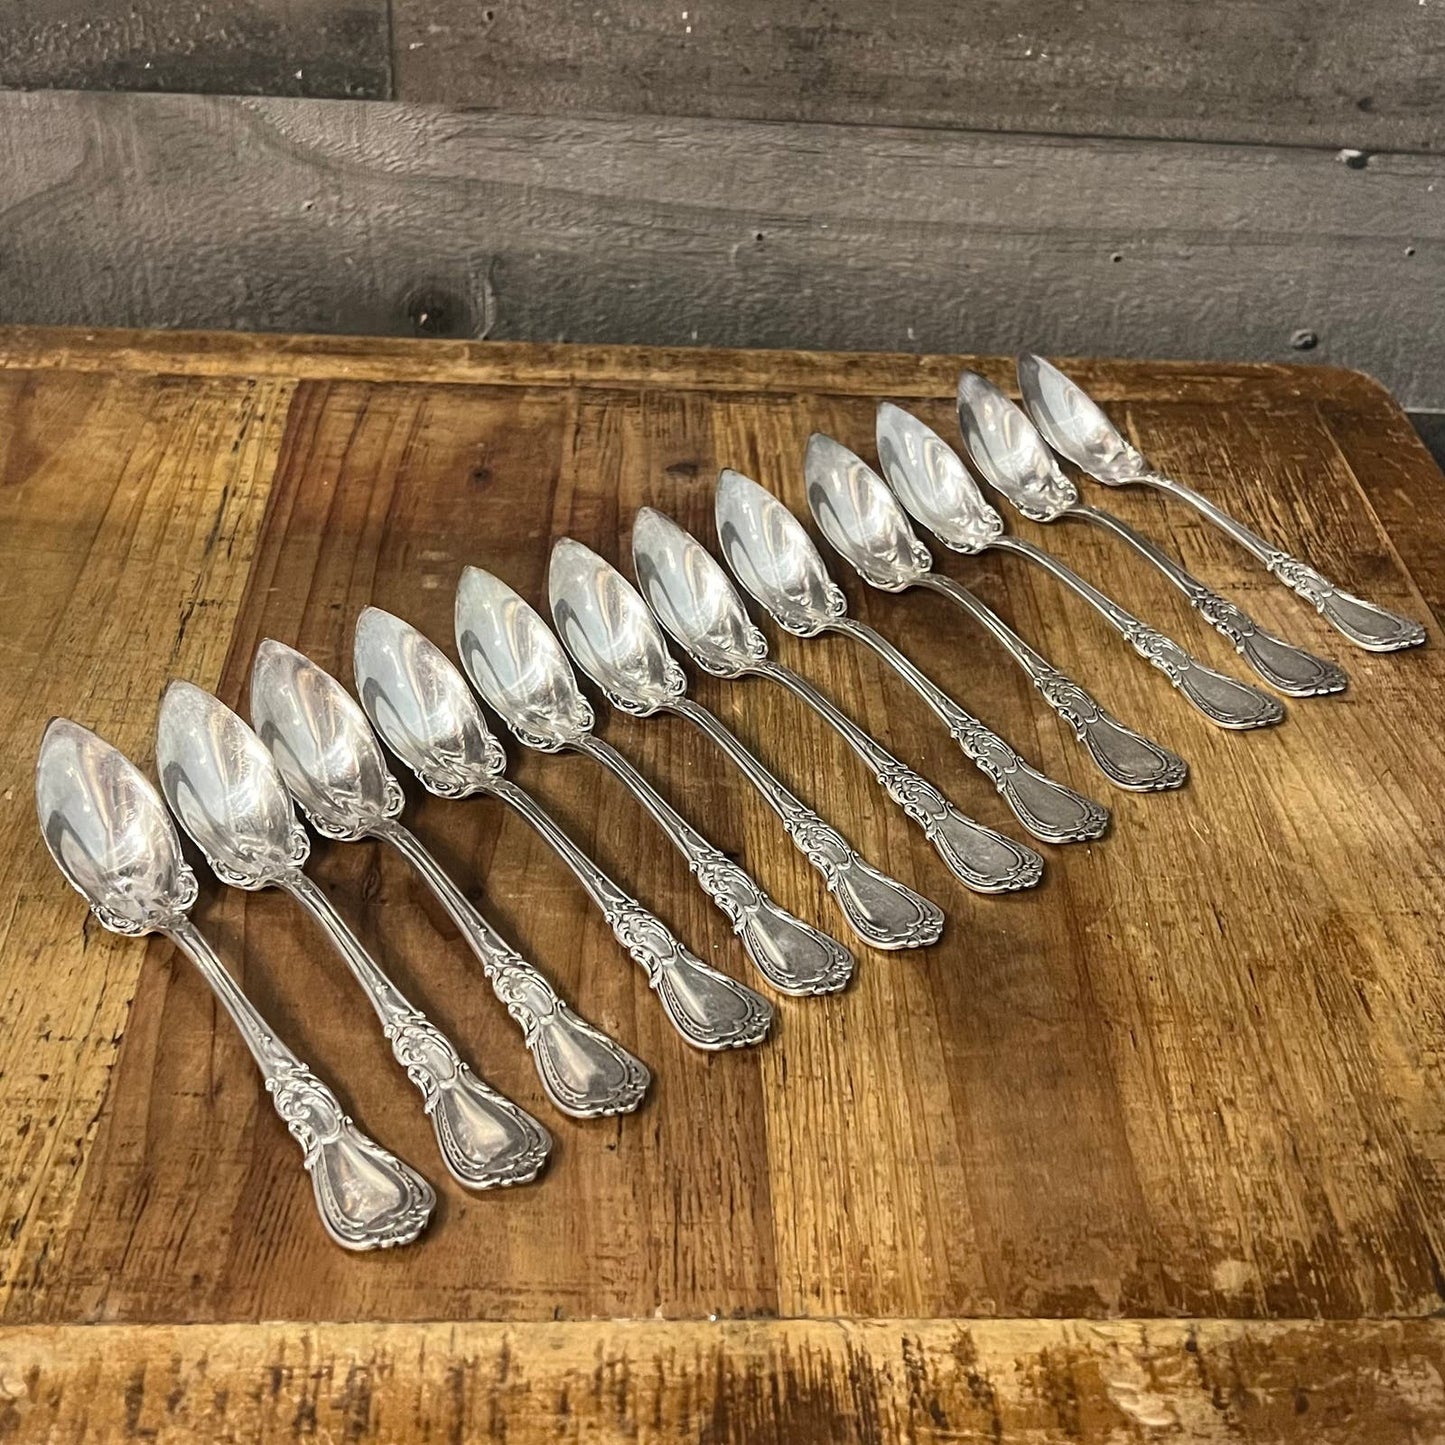 1847 Rogers Bros AI Silverplated Fruit Spoons - Set of 12